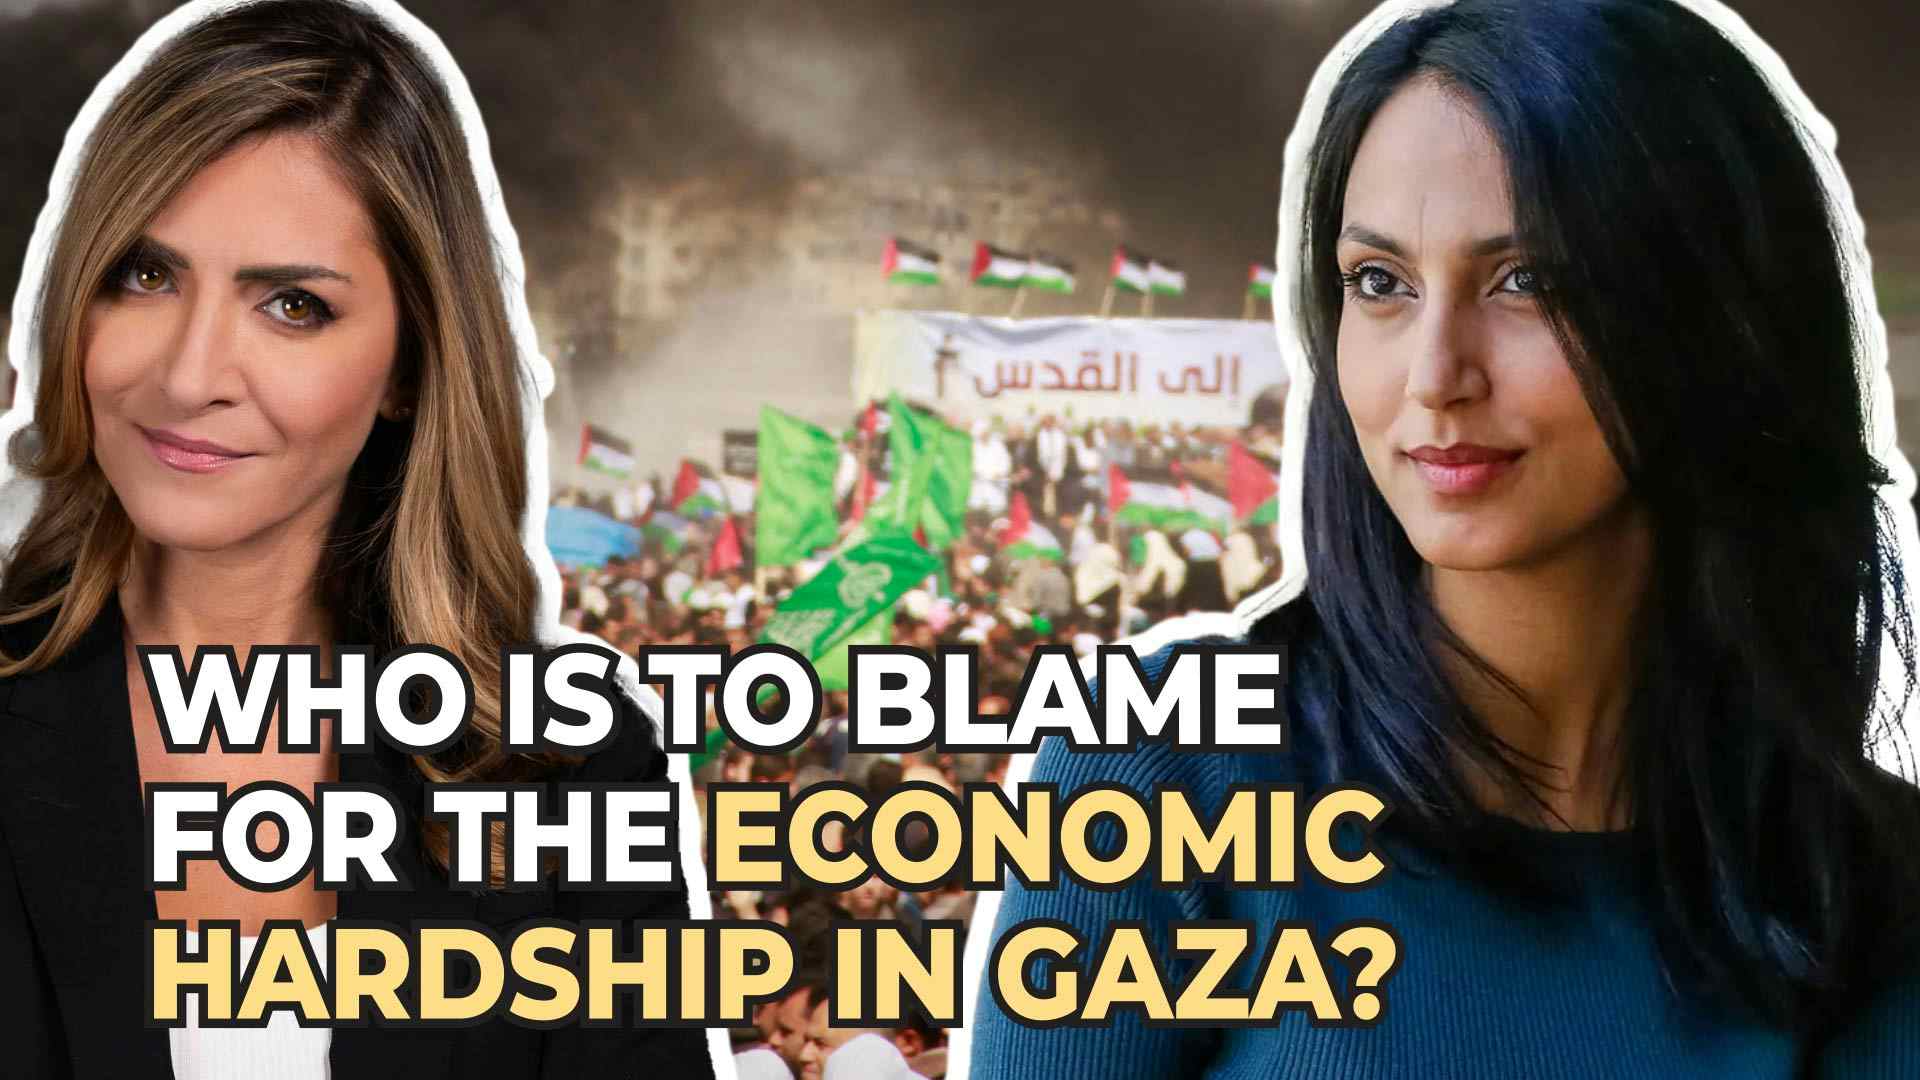 Who is to Blame for the Economic Hardship in Gaza?